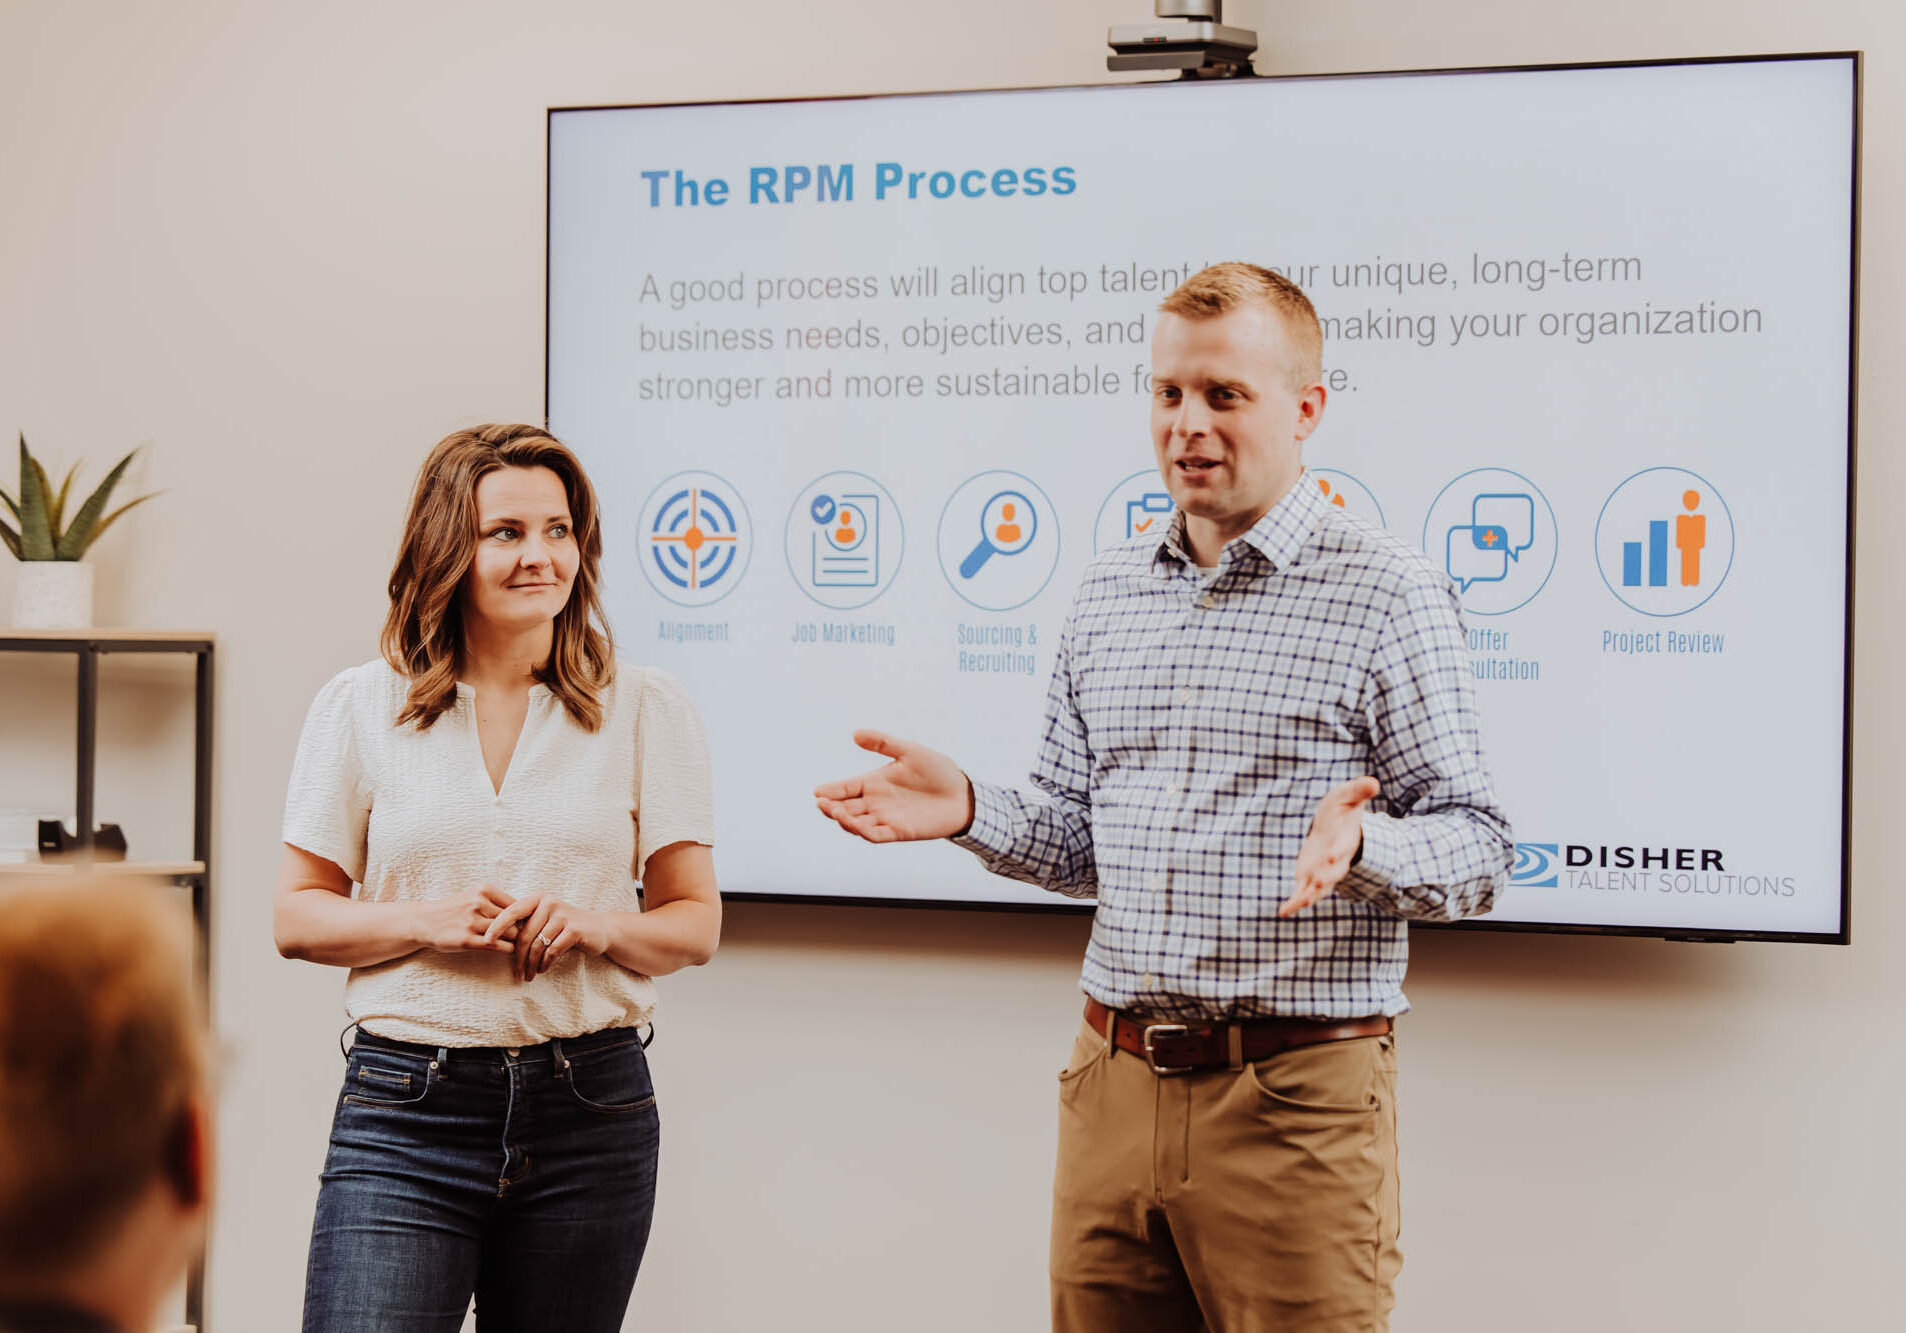 Two DISHER Talent recruiters present on the RPM process while in a workshop